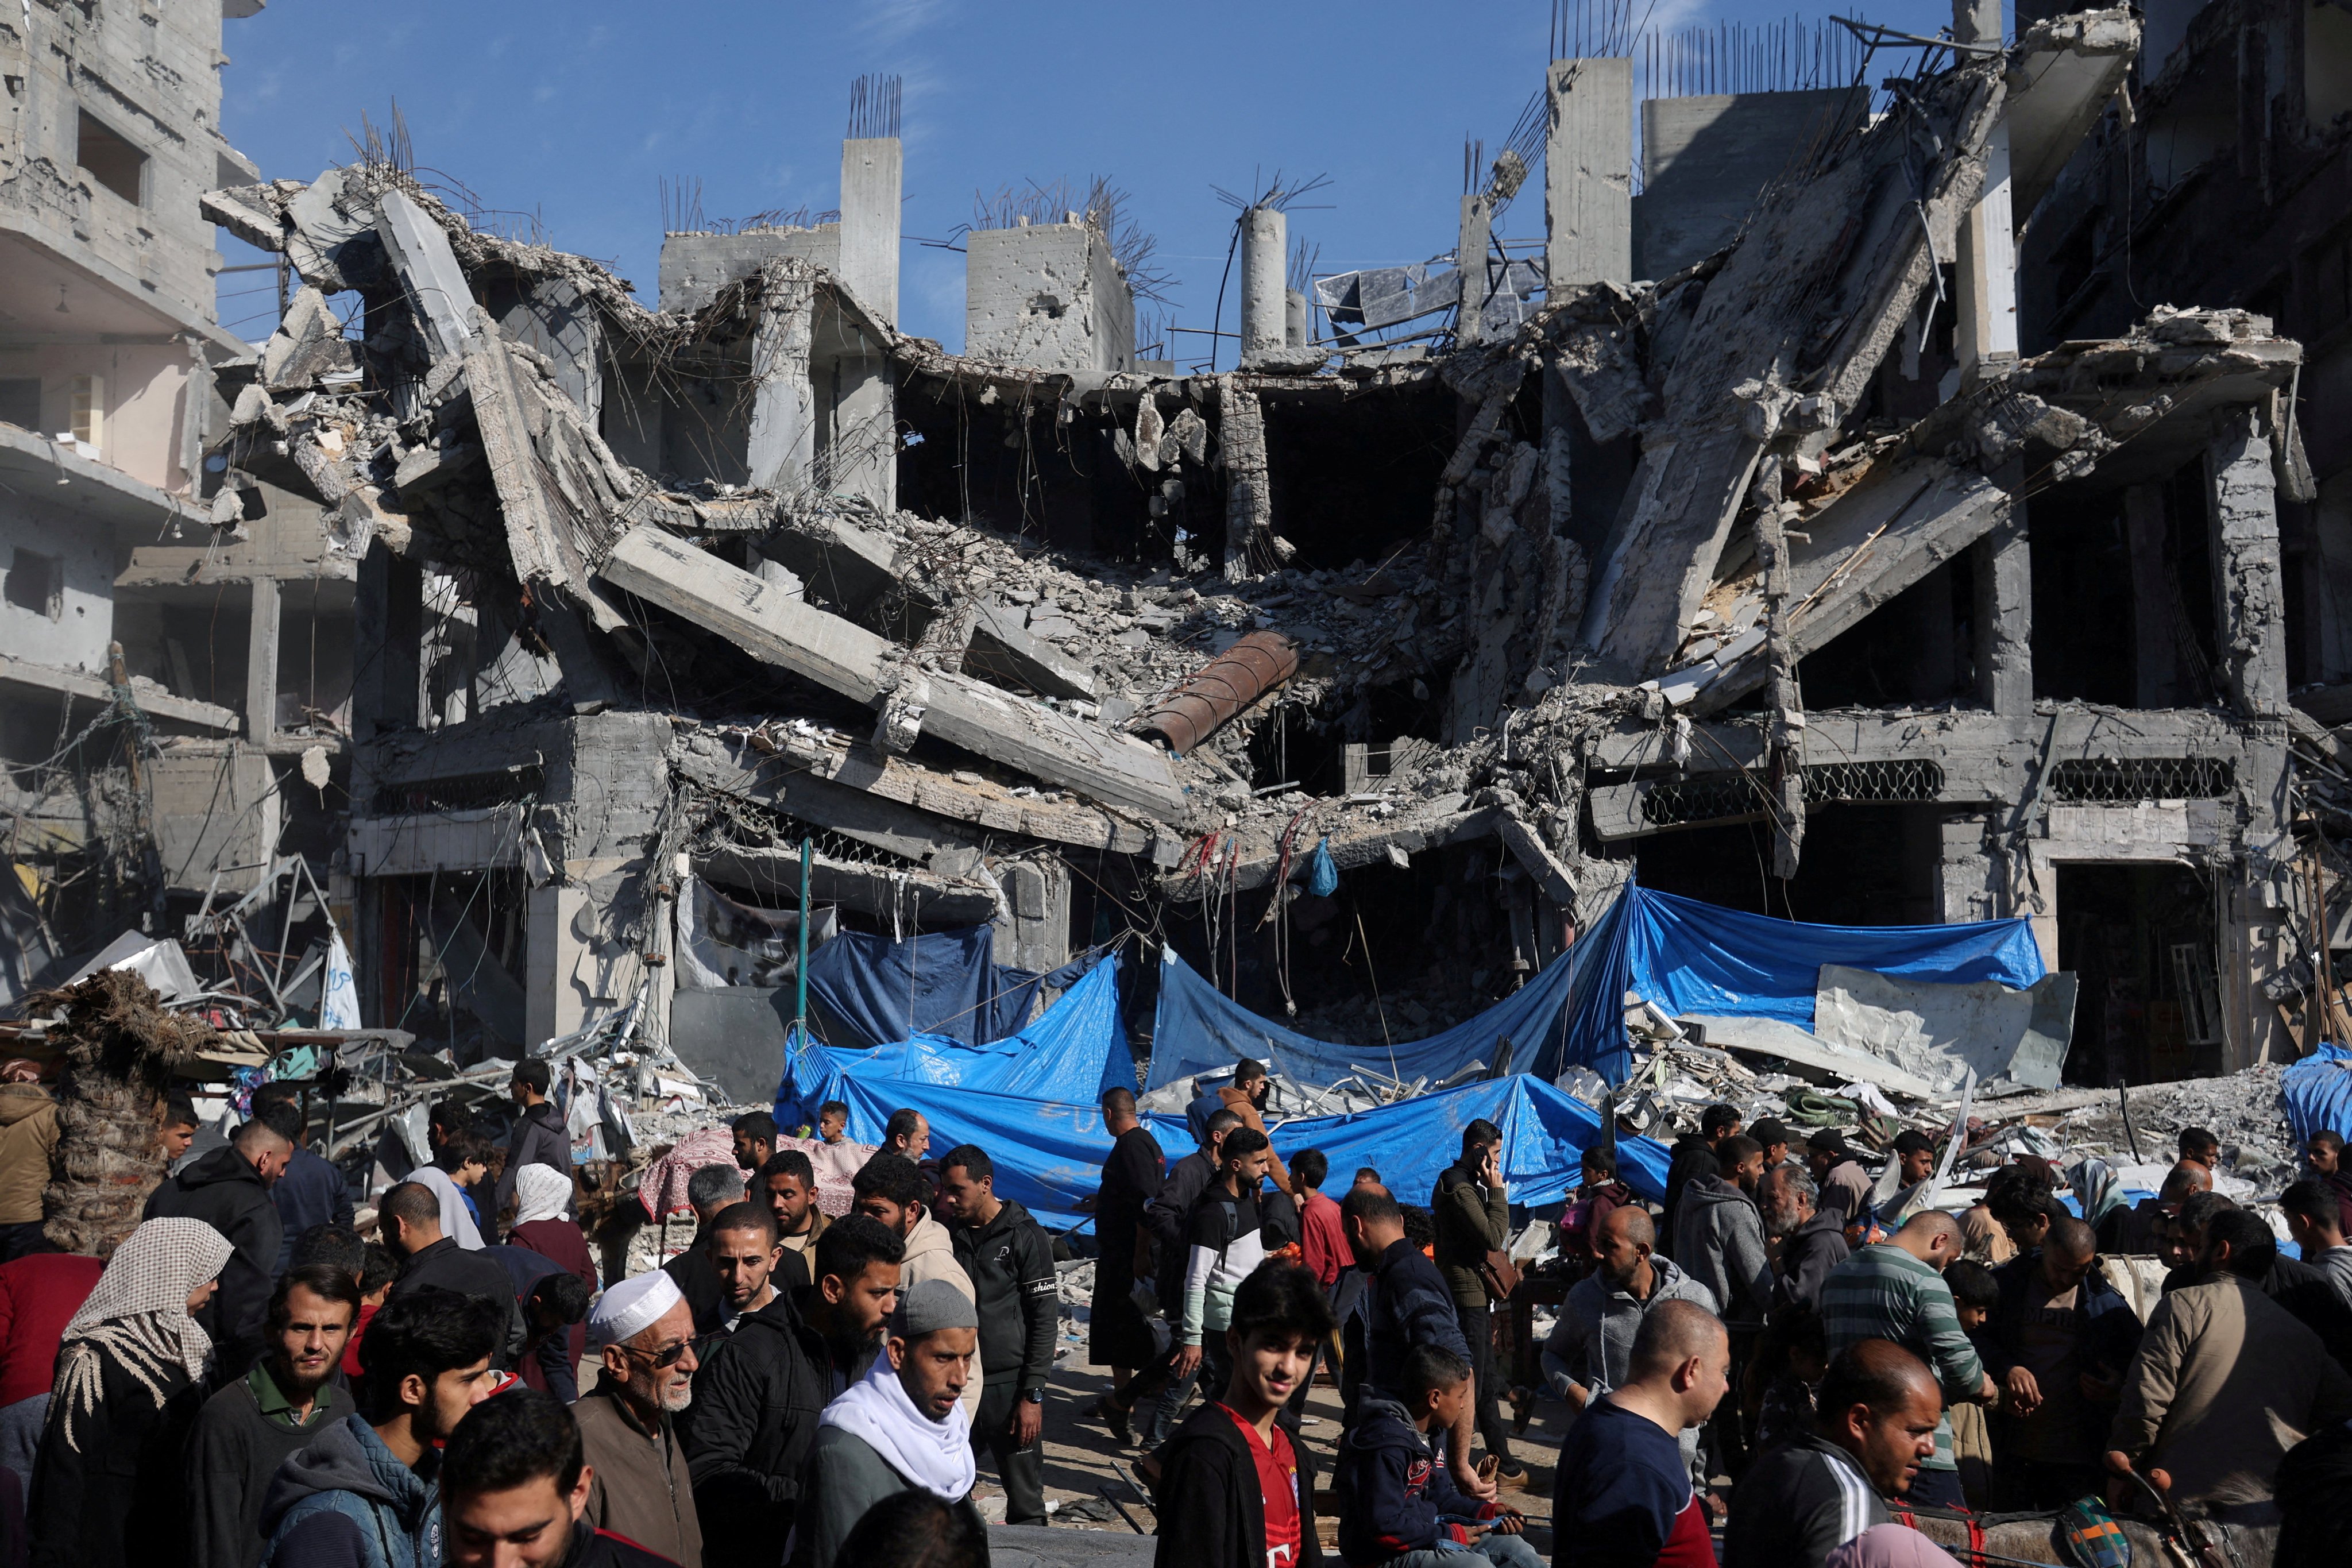 Palestinians shop on Thursday in an open-air market near the ruins of houses and buildings destroyed in Israeli strikes. Photo: Reuters